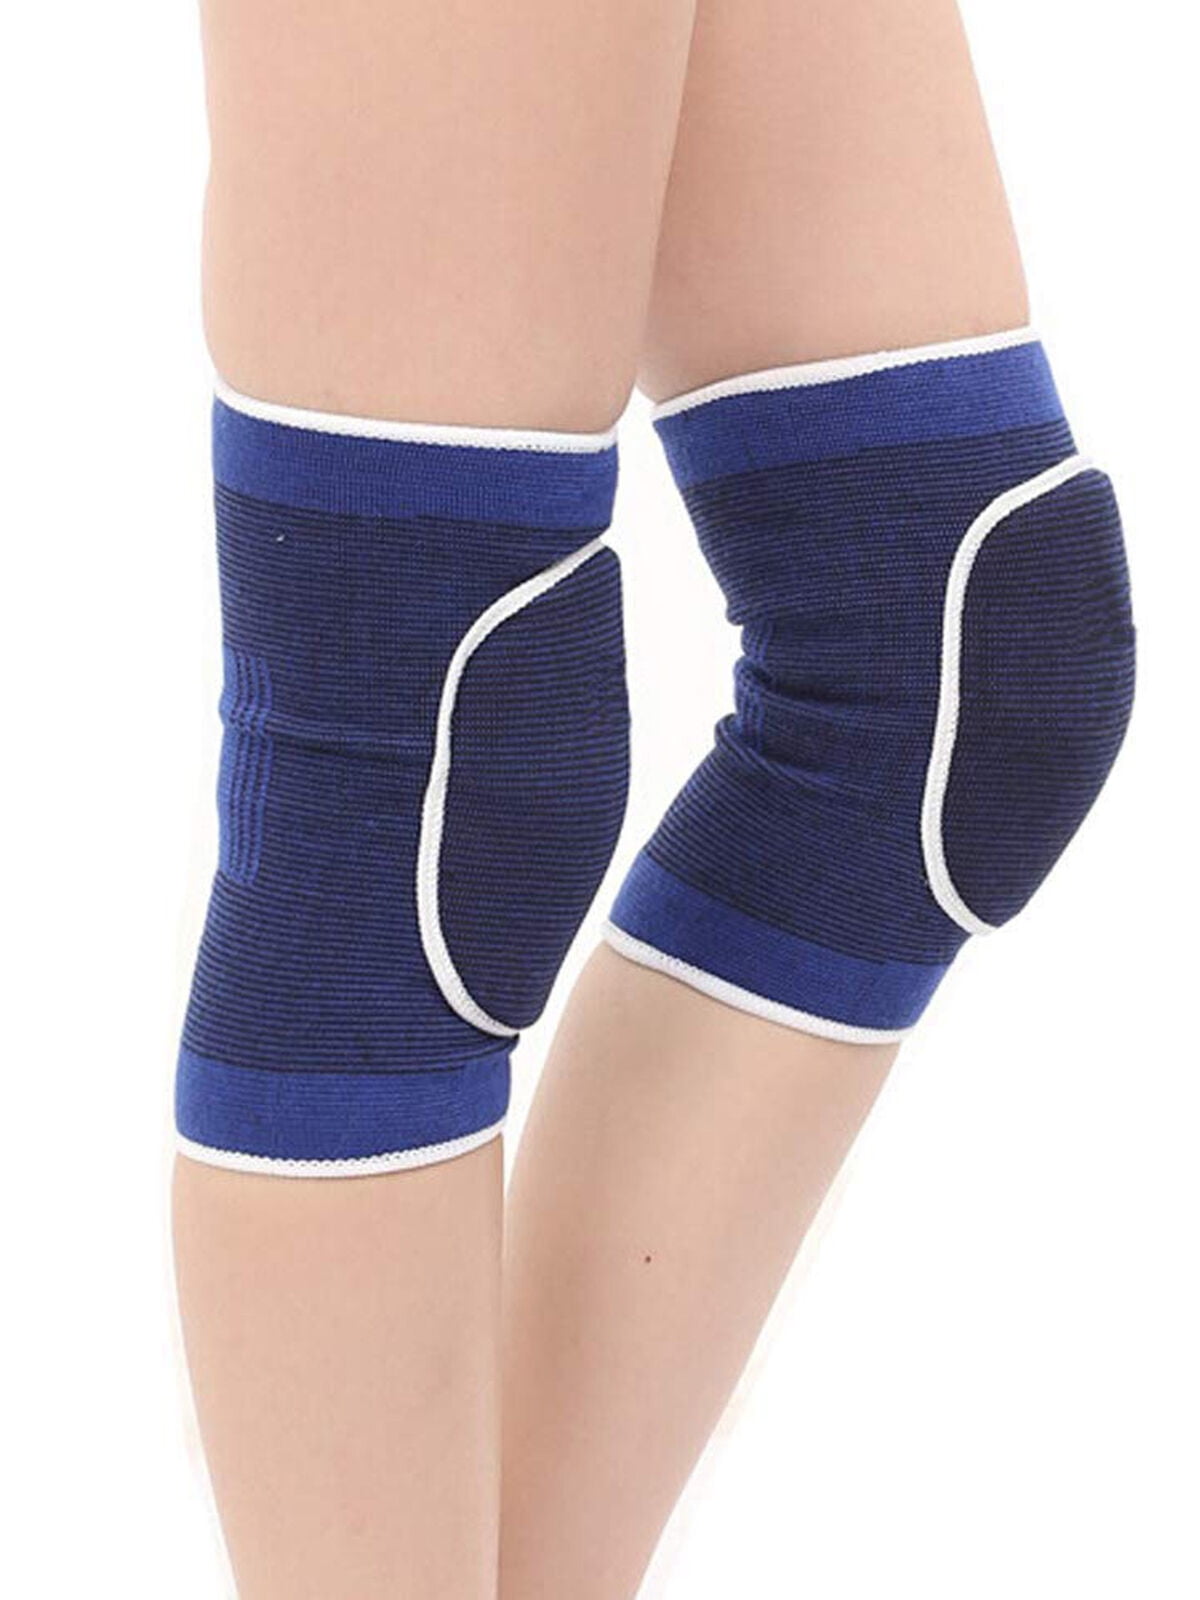 Durable 1 Pair Foam Protector Cushion Knee Support Pads Kneecap Safety Sports./ 